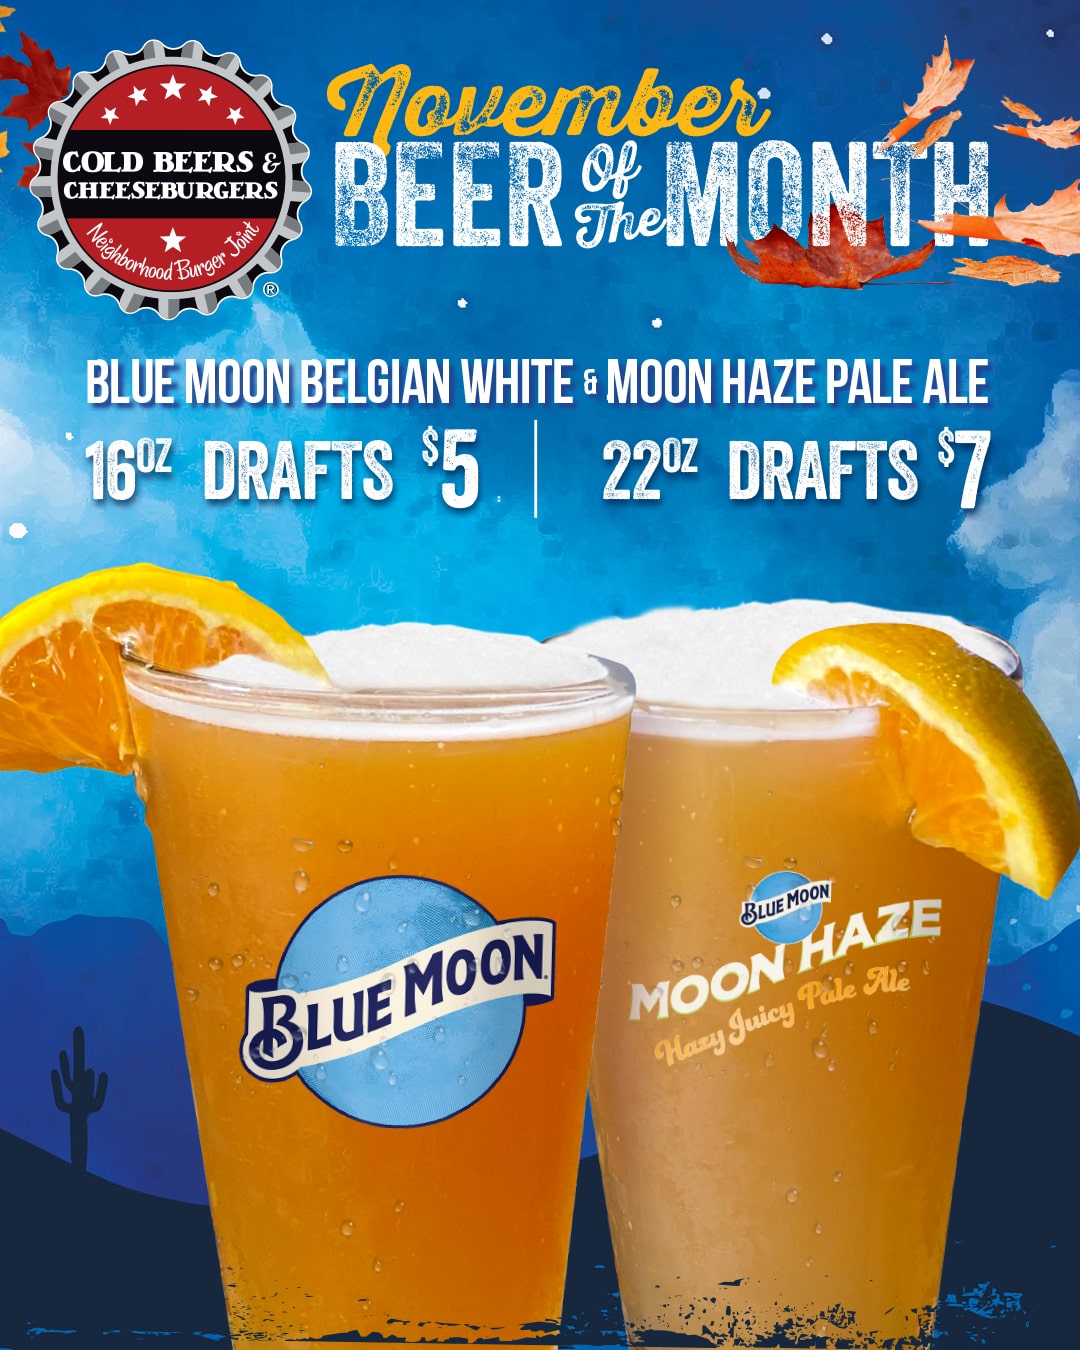 High Noon Beer of the Month